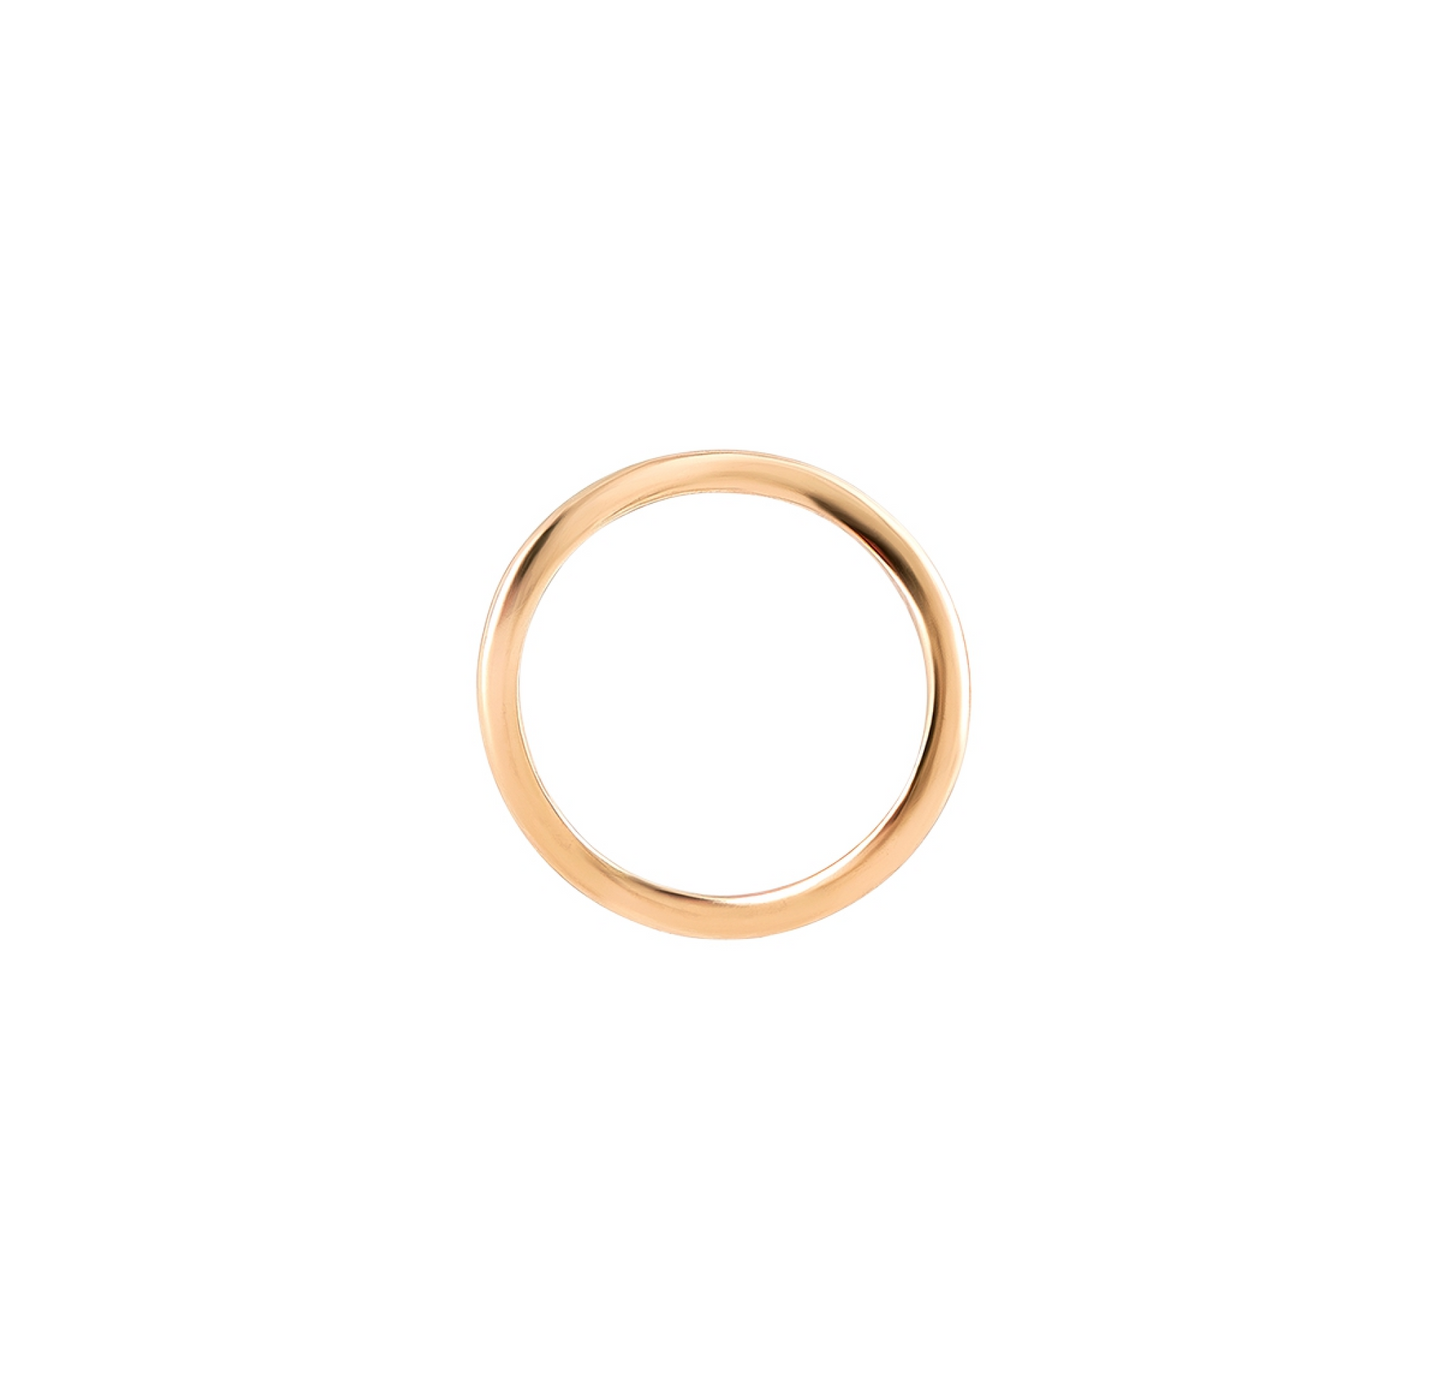 Analemma ring in yellow gold